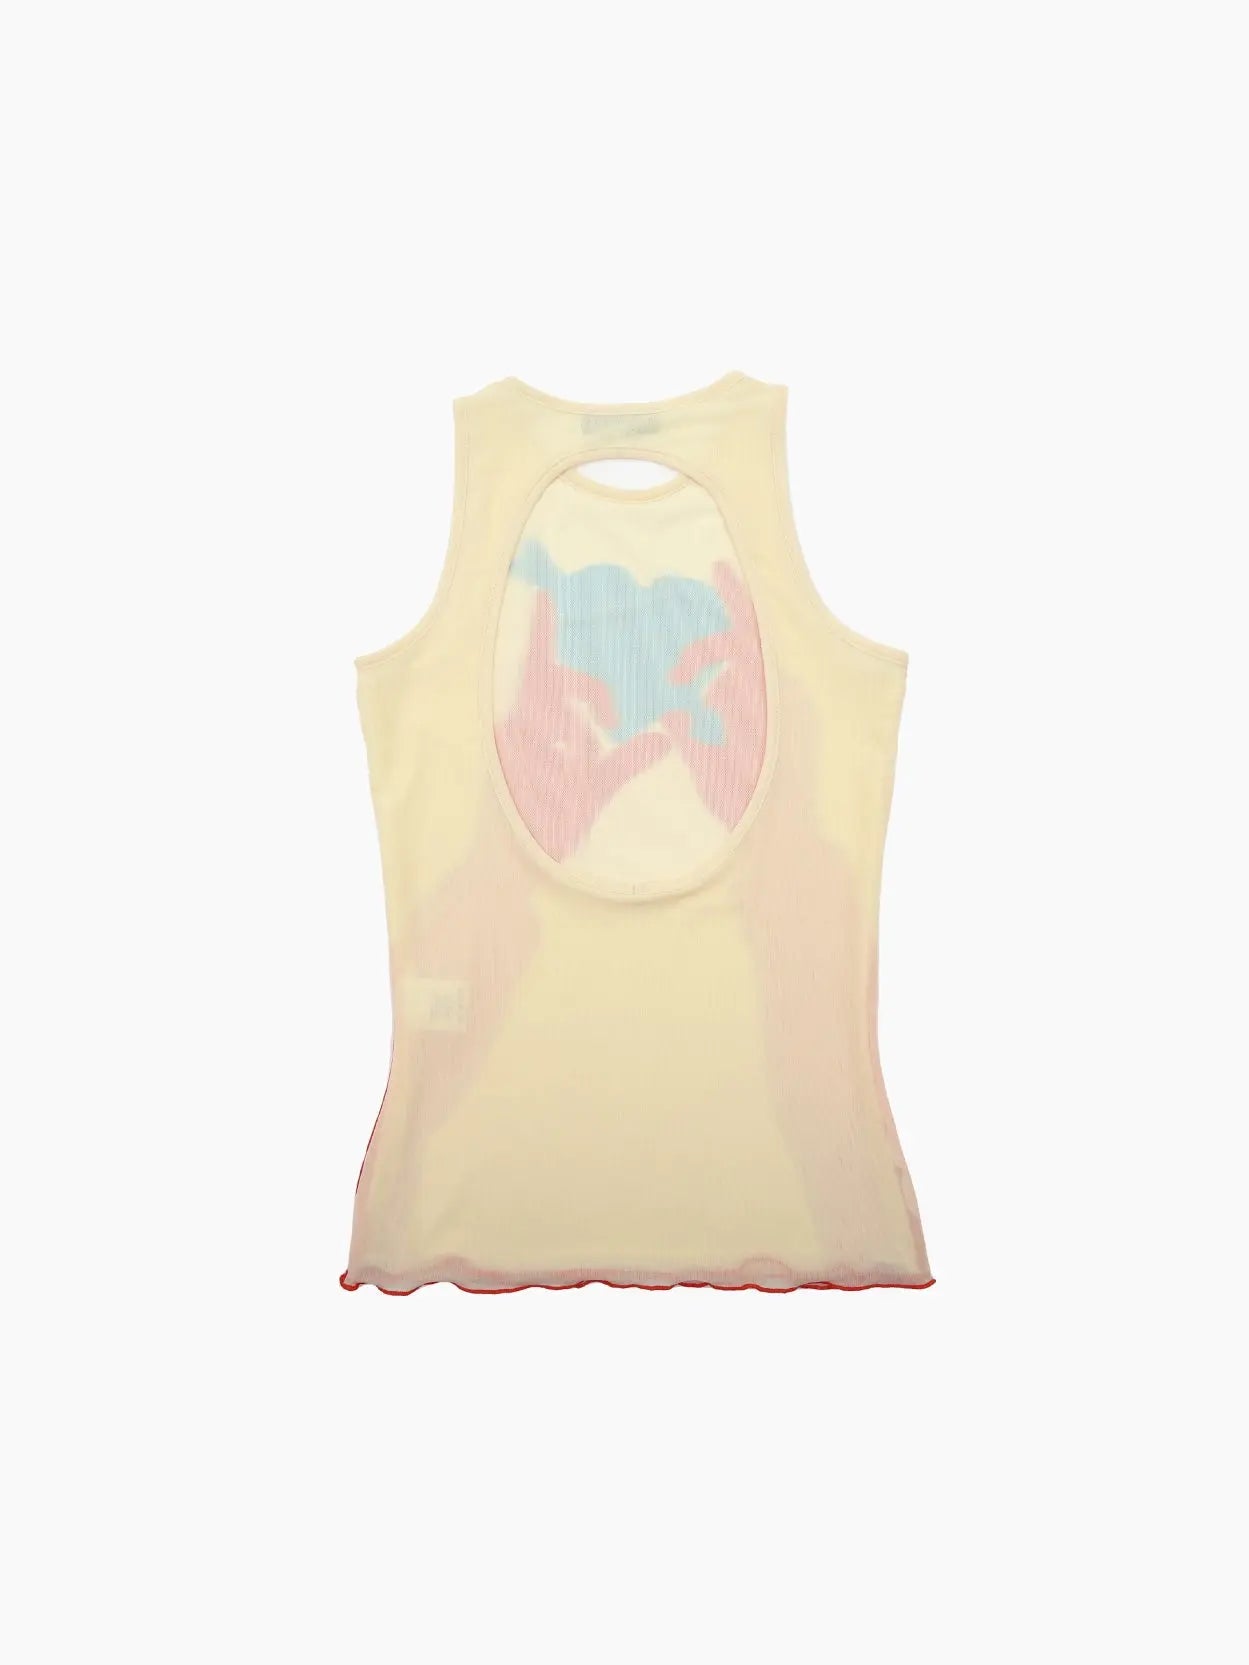 A beige sleeveless top with a printed design of red hands creating a bird shadow puppet, featuring a blue silhouette of the bird in the center. The top has a round neckline and a slightly wavy hem, perfect for adding an artistic touch from Barcelona's Bassal store to your wardrobe. This is the Buco Tulle Top Lye Light Yellow by Sunnei.